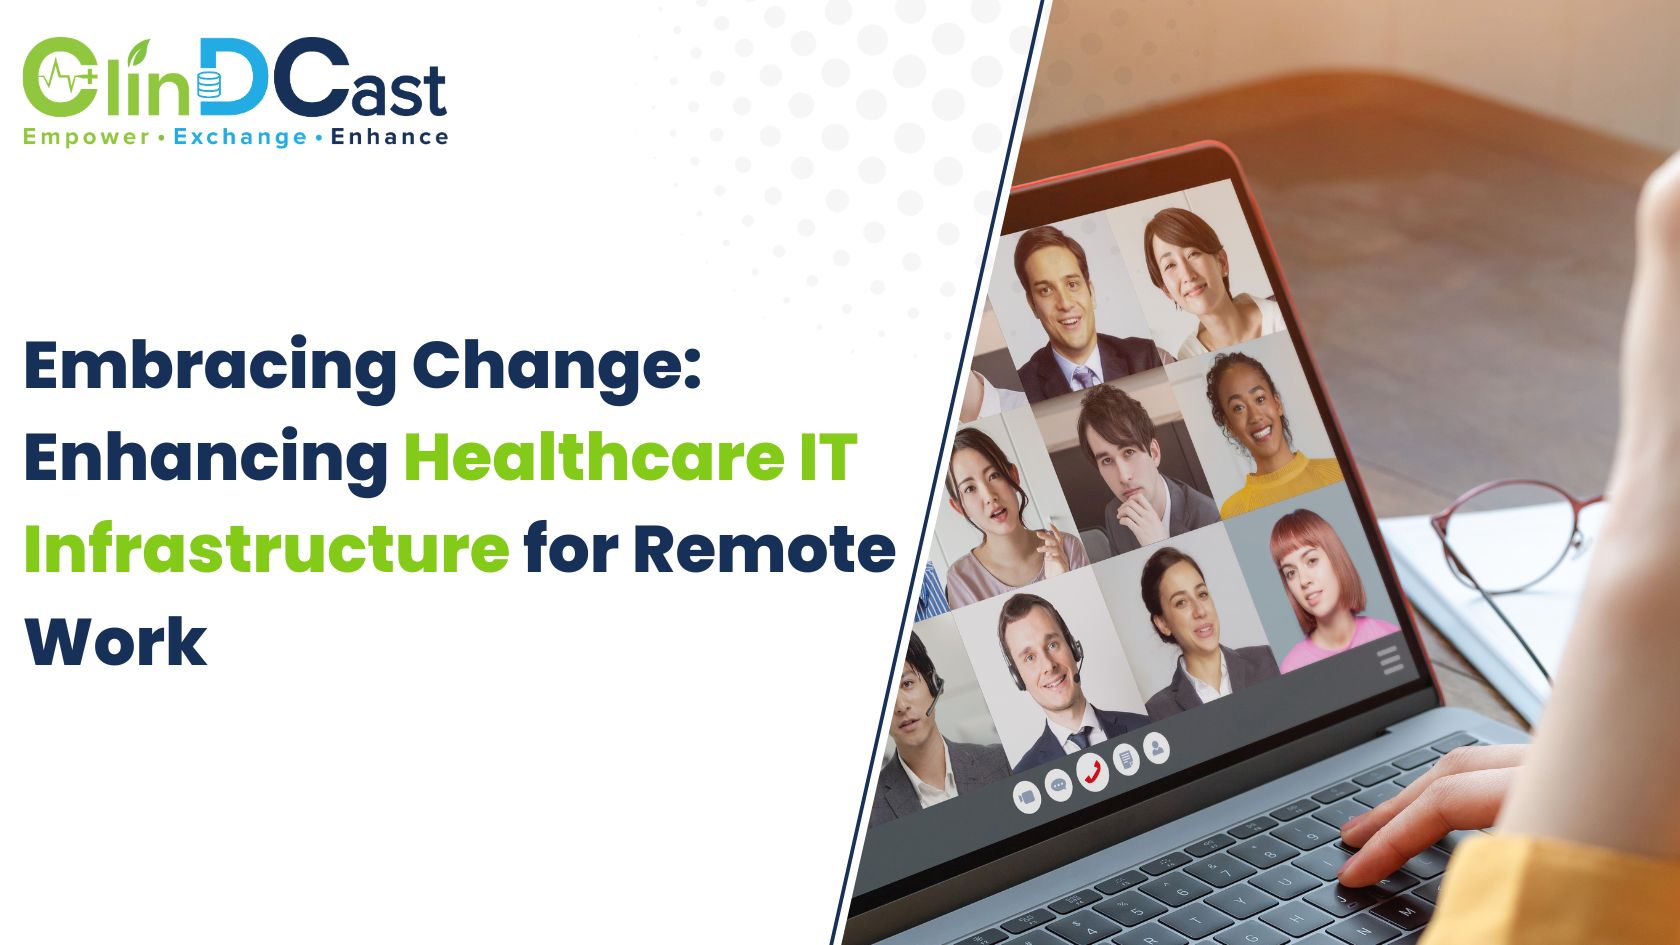 Embracing Change: Enhancing Healthcare IT Infrastructure for Remote Work